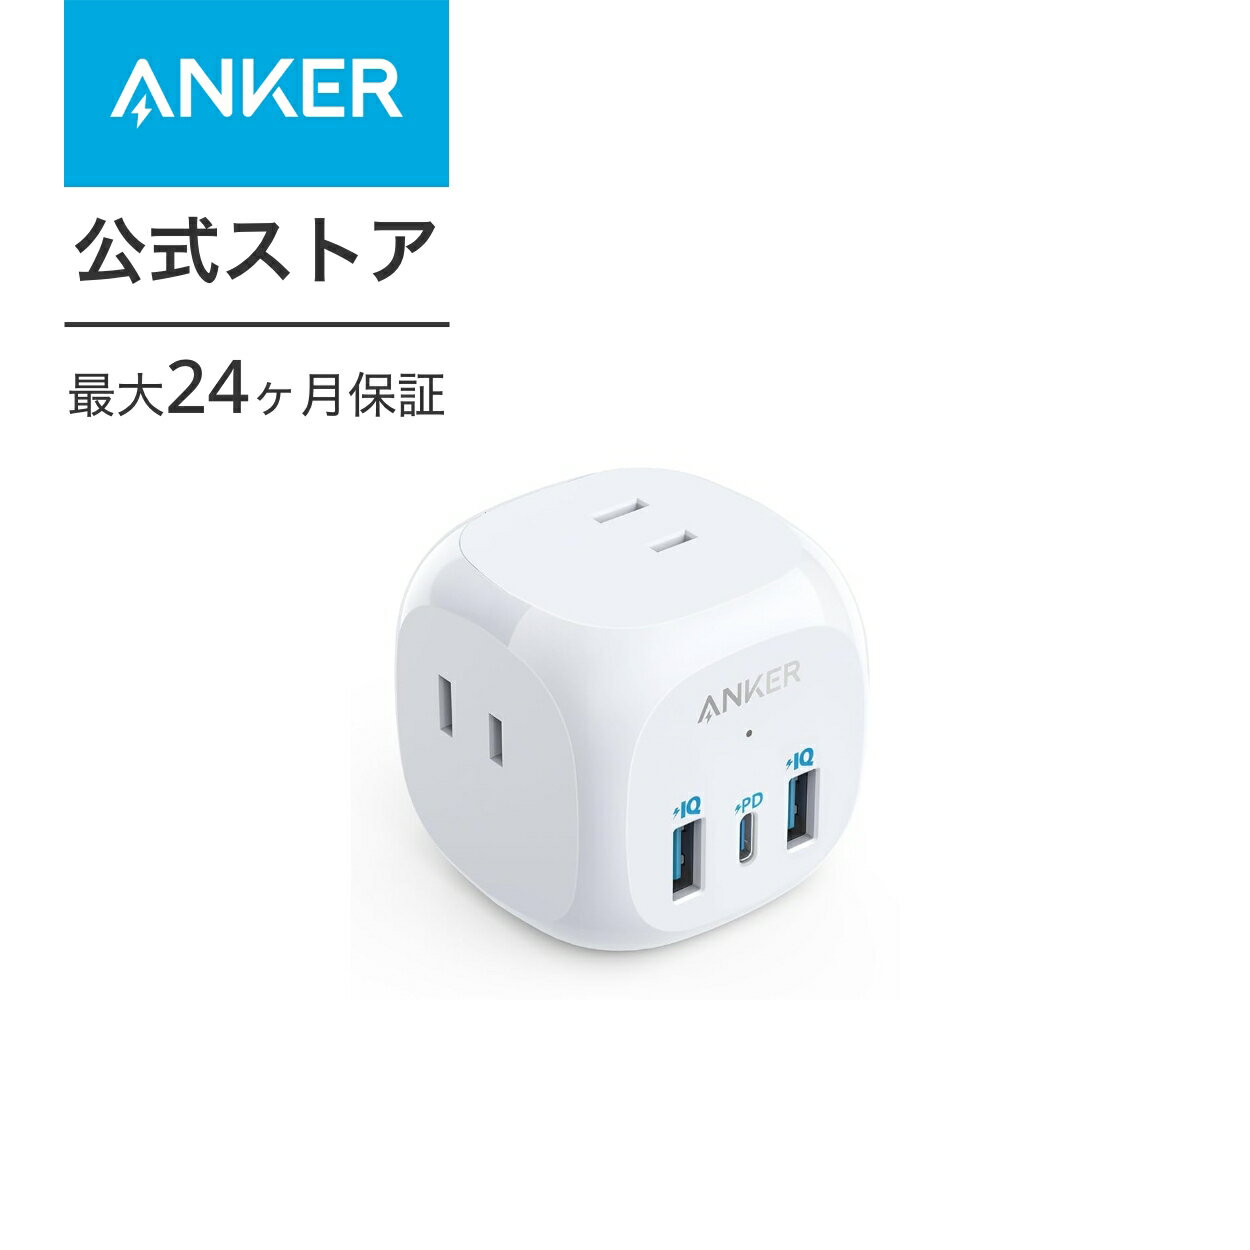 Anker PowerExtend (6-in-1)(USBタップ 電源タップ AC差込口 USB-Cポート USB-Aポート) 【PSE技術基準適合/USB Power Delivery対応/コンパクトサイズ】MacBook PD対応 Windows PC iPad iPhone Galaxy Android スマートフォン